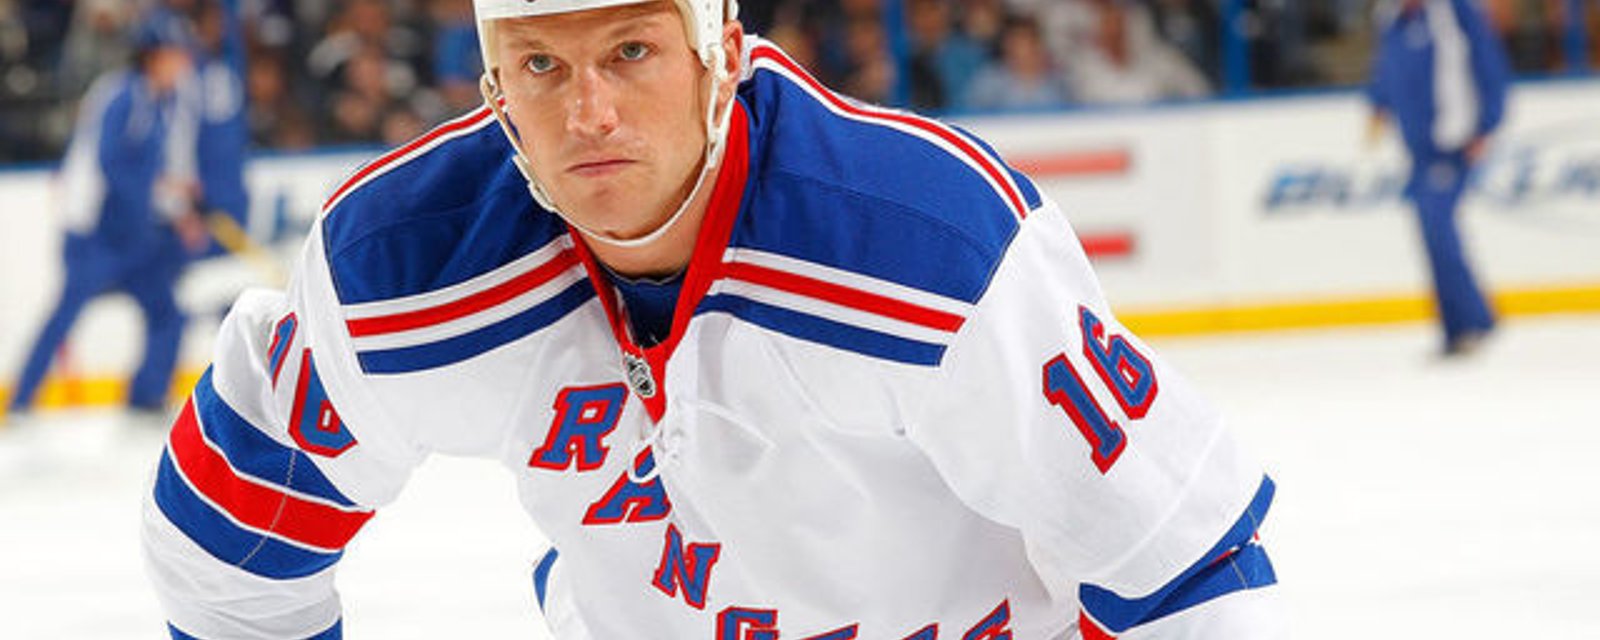 Sean Avery lands cameo in latest blockbuster movie!